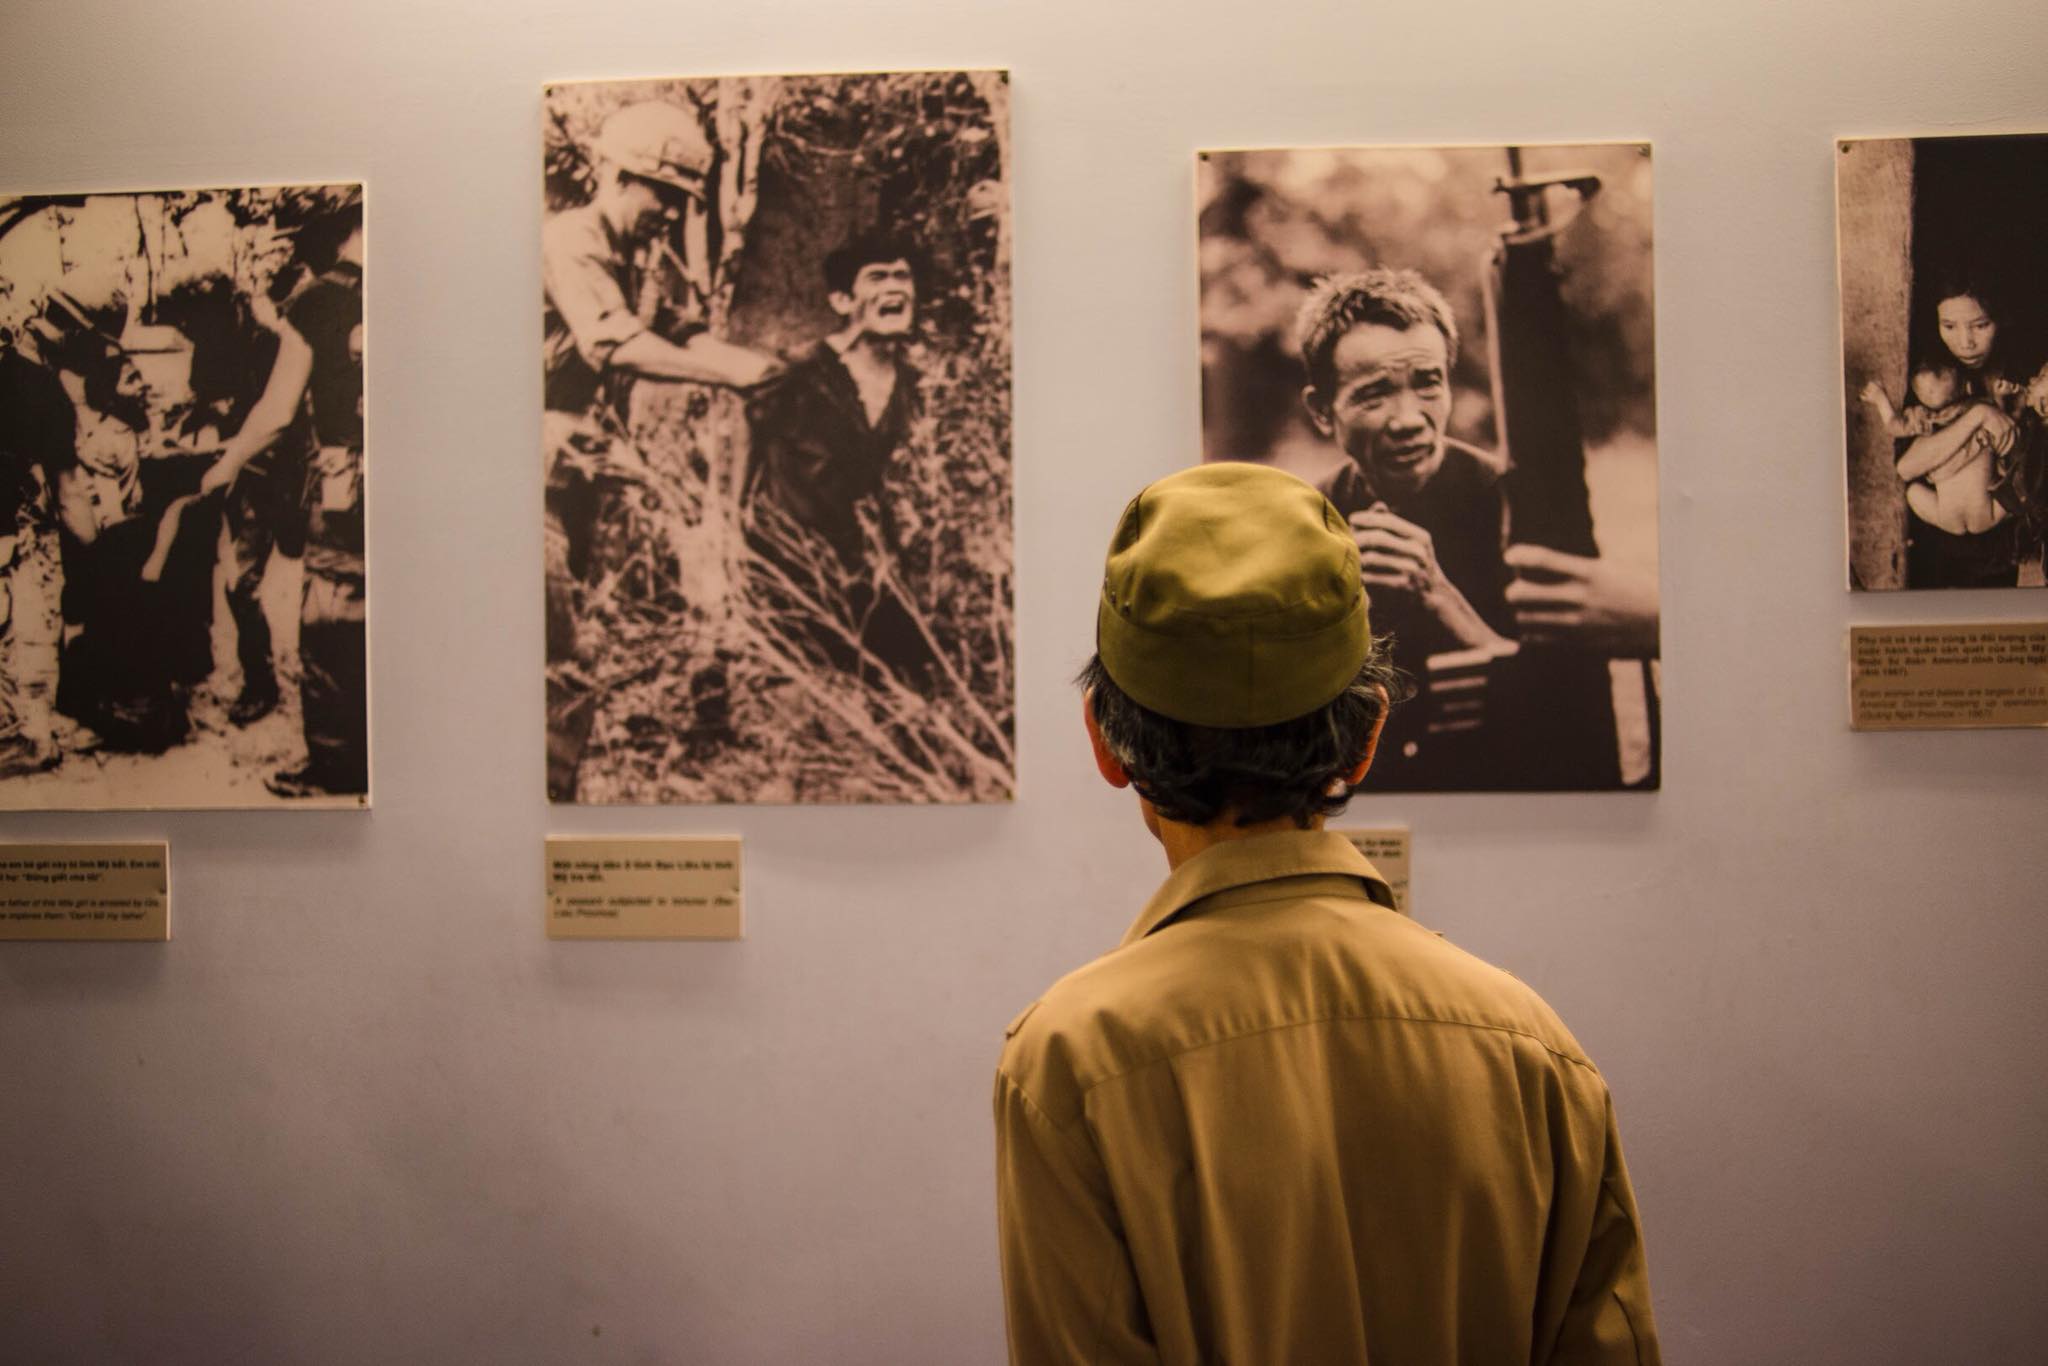 A veteran watches war pictures on display at a museum in Ho Chi Minh City. Photo: Humans of Saigon